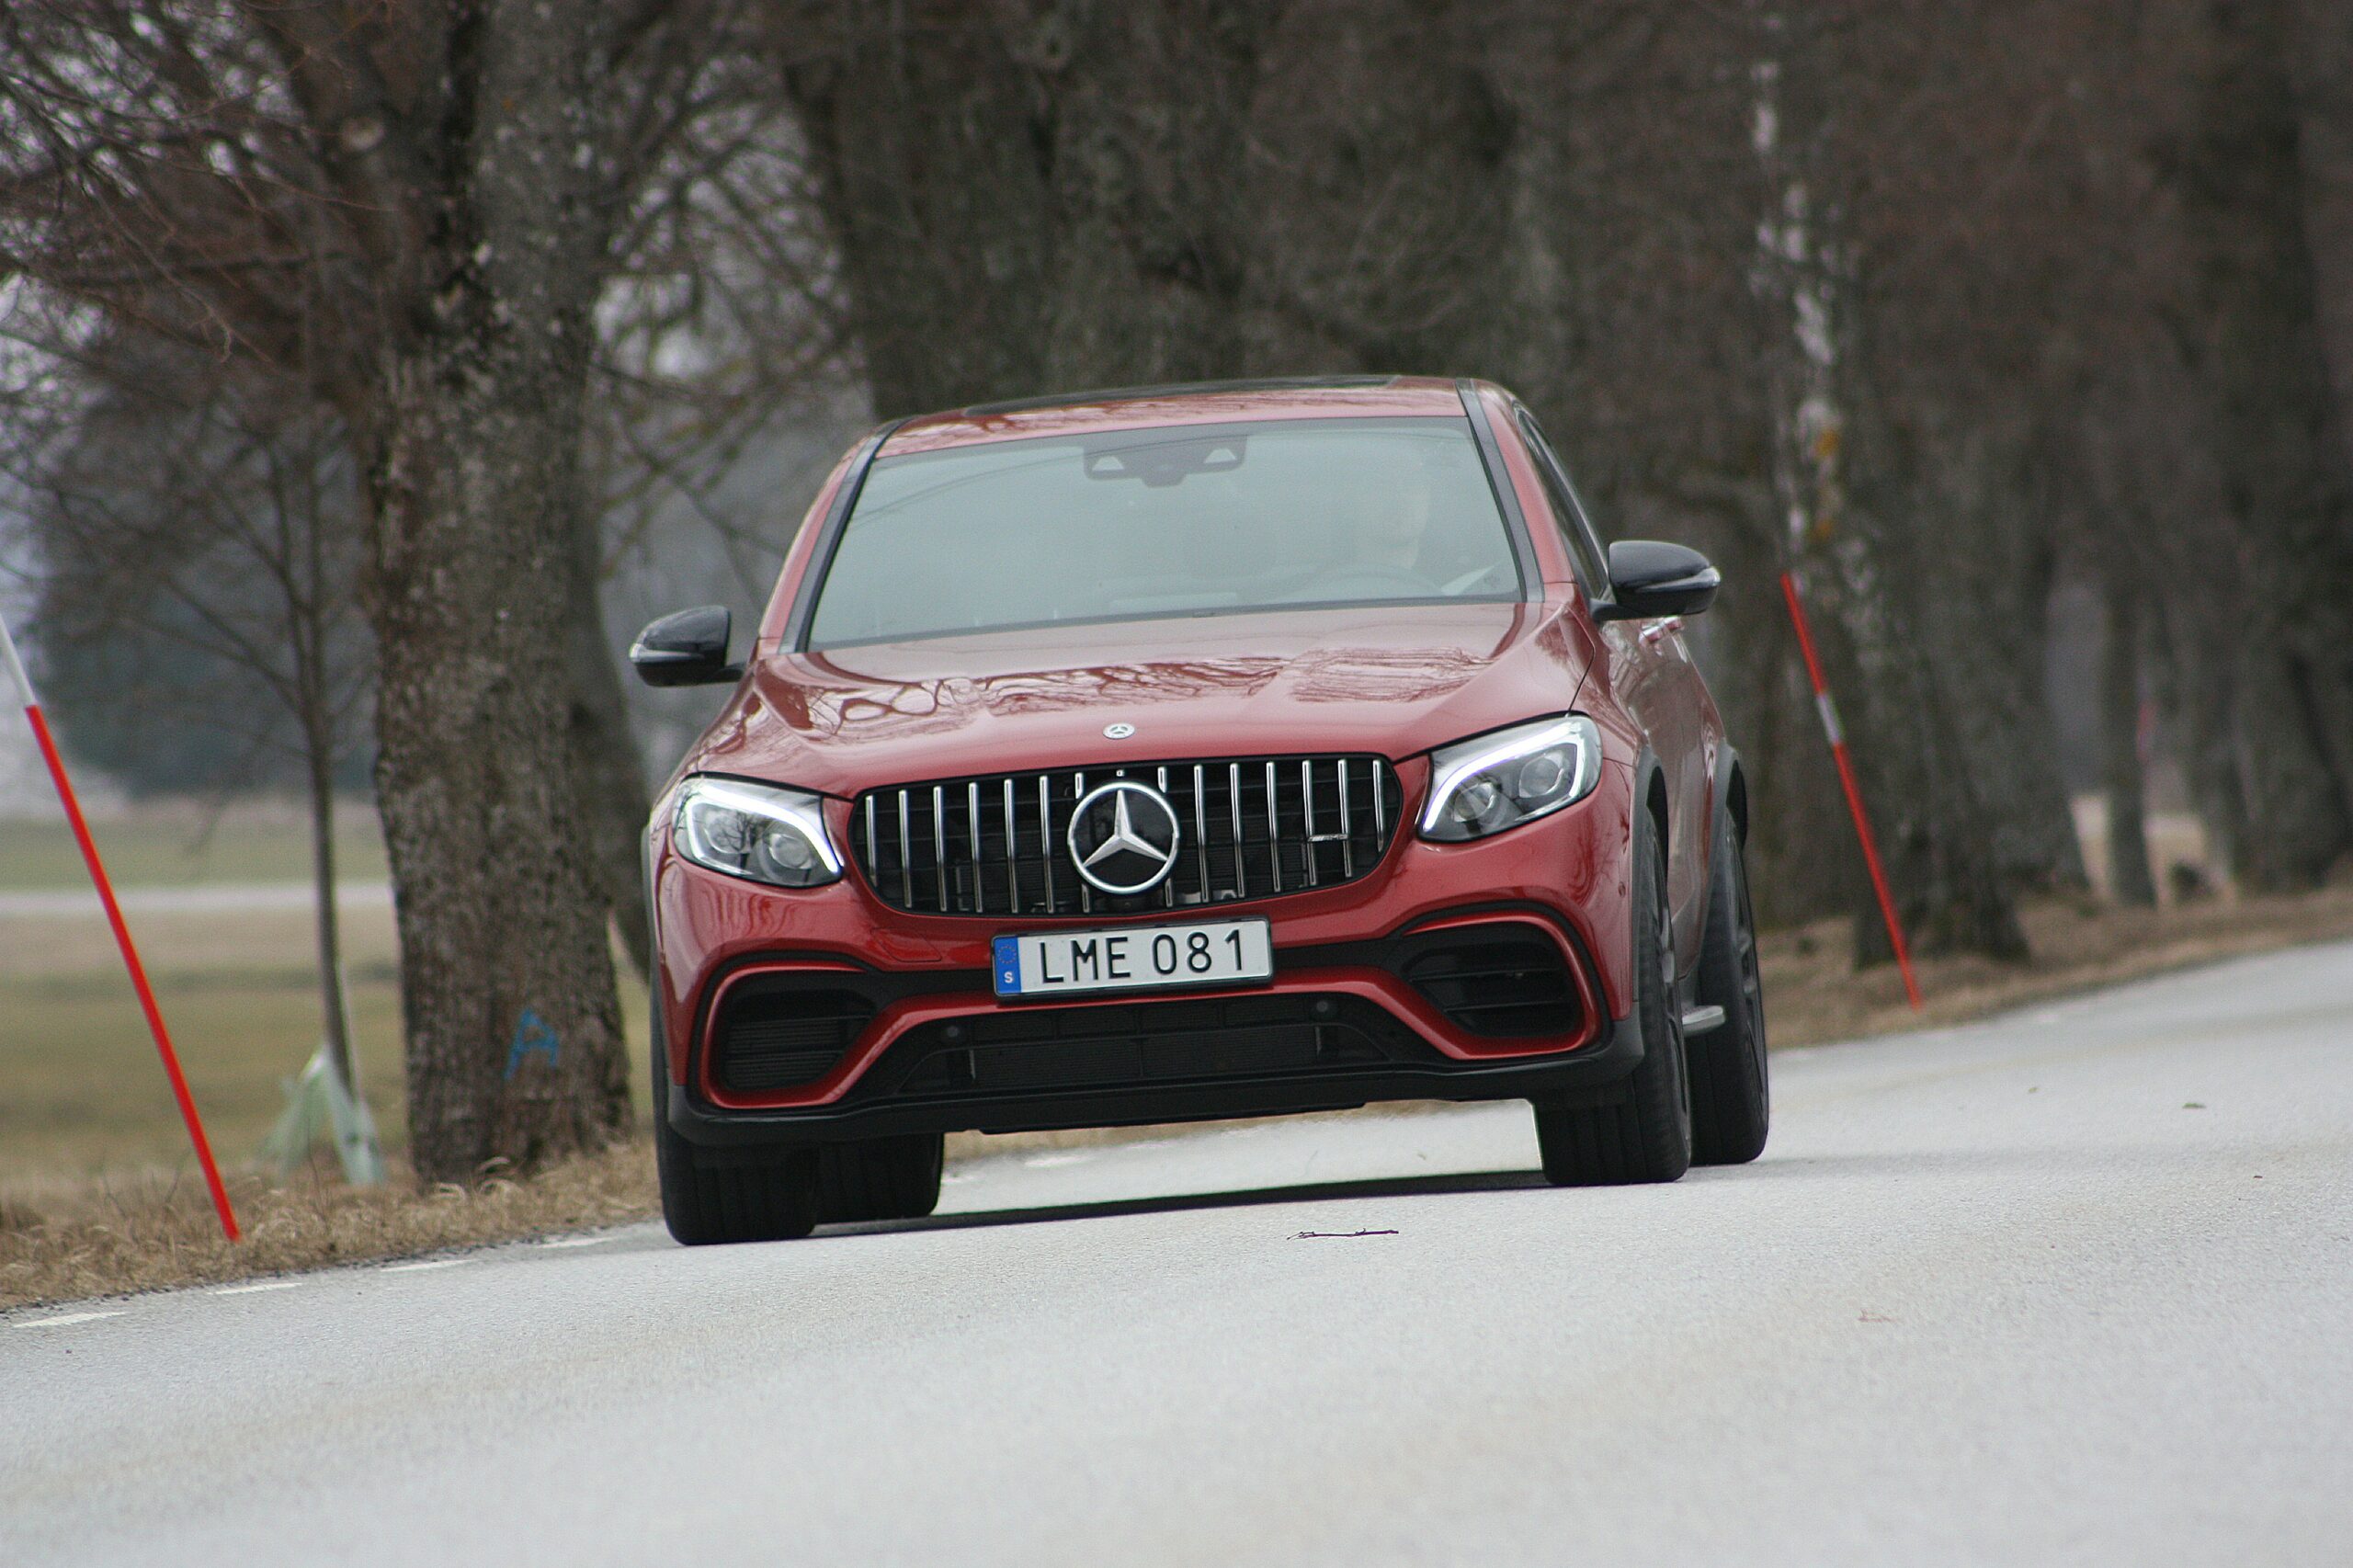 You are currently viewing The Mercedes-Benz GLC: A Luxury SUV with Style, Performance, and Safety